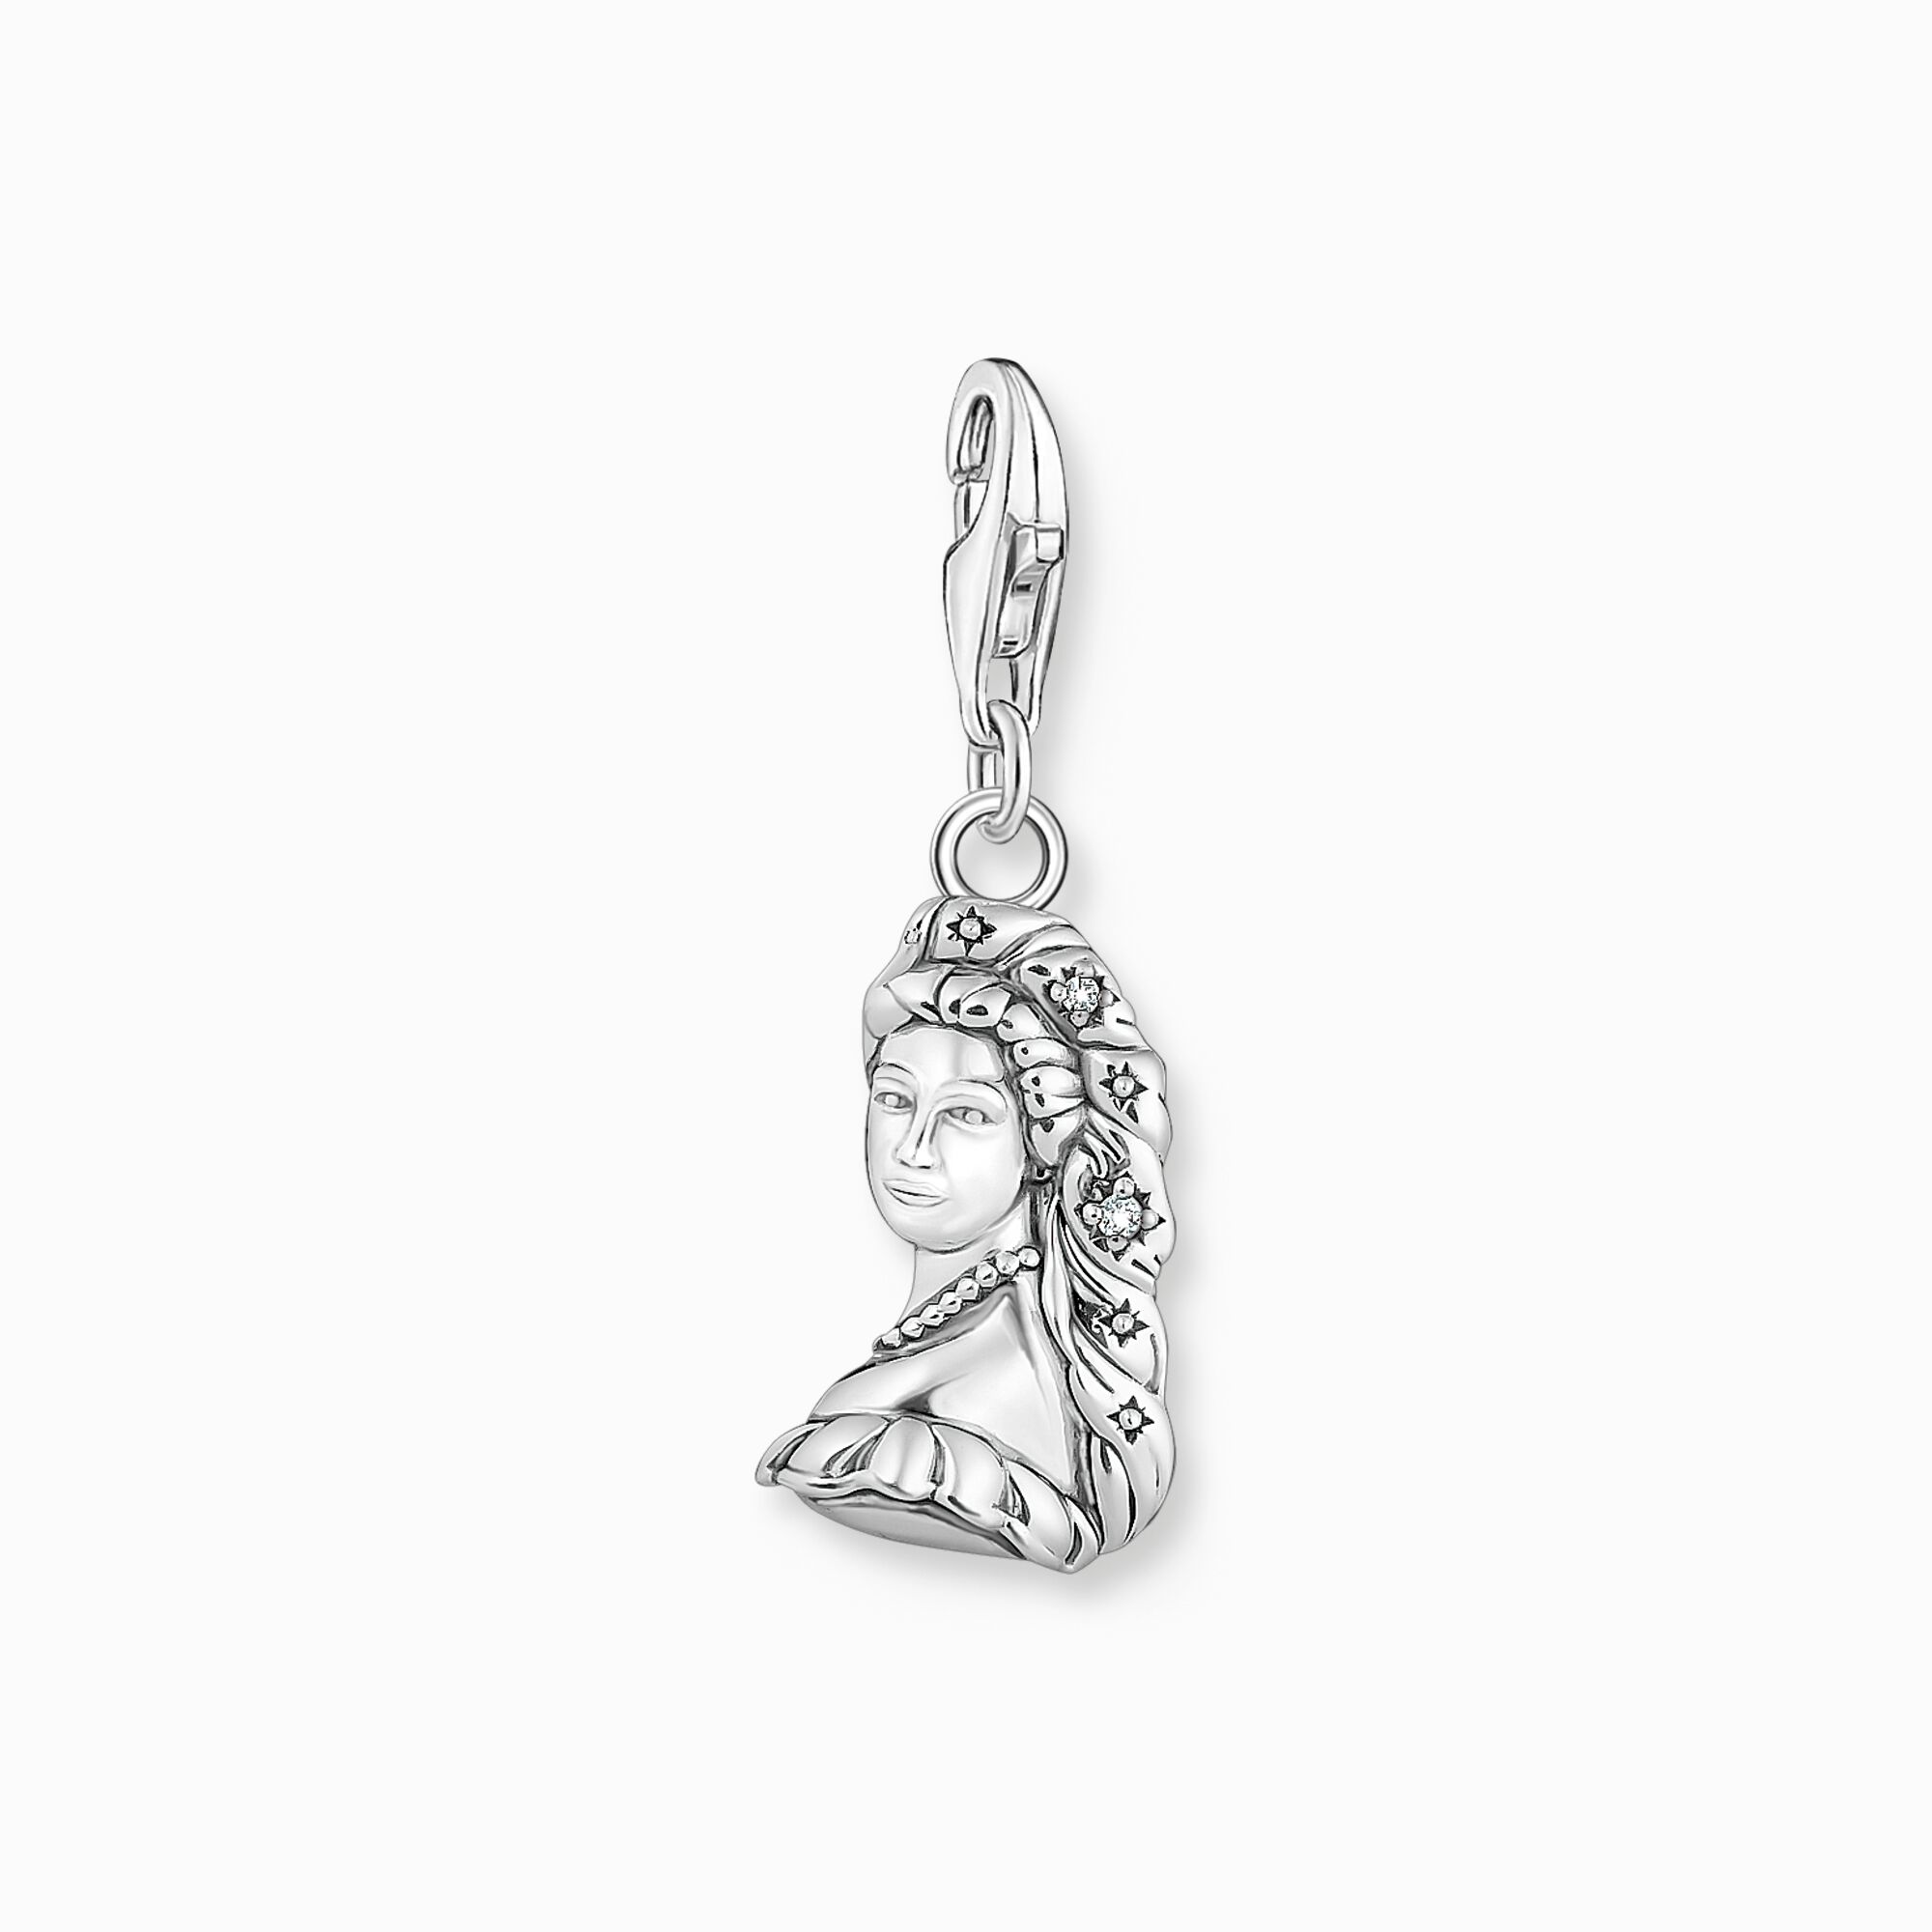 Charm pendant Sissi with white stone silver from the Charm Club collection in the THOMAS SABO online store